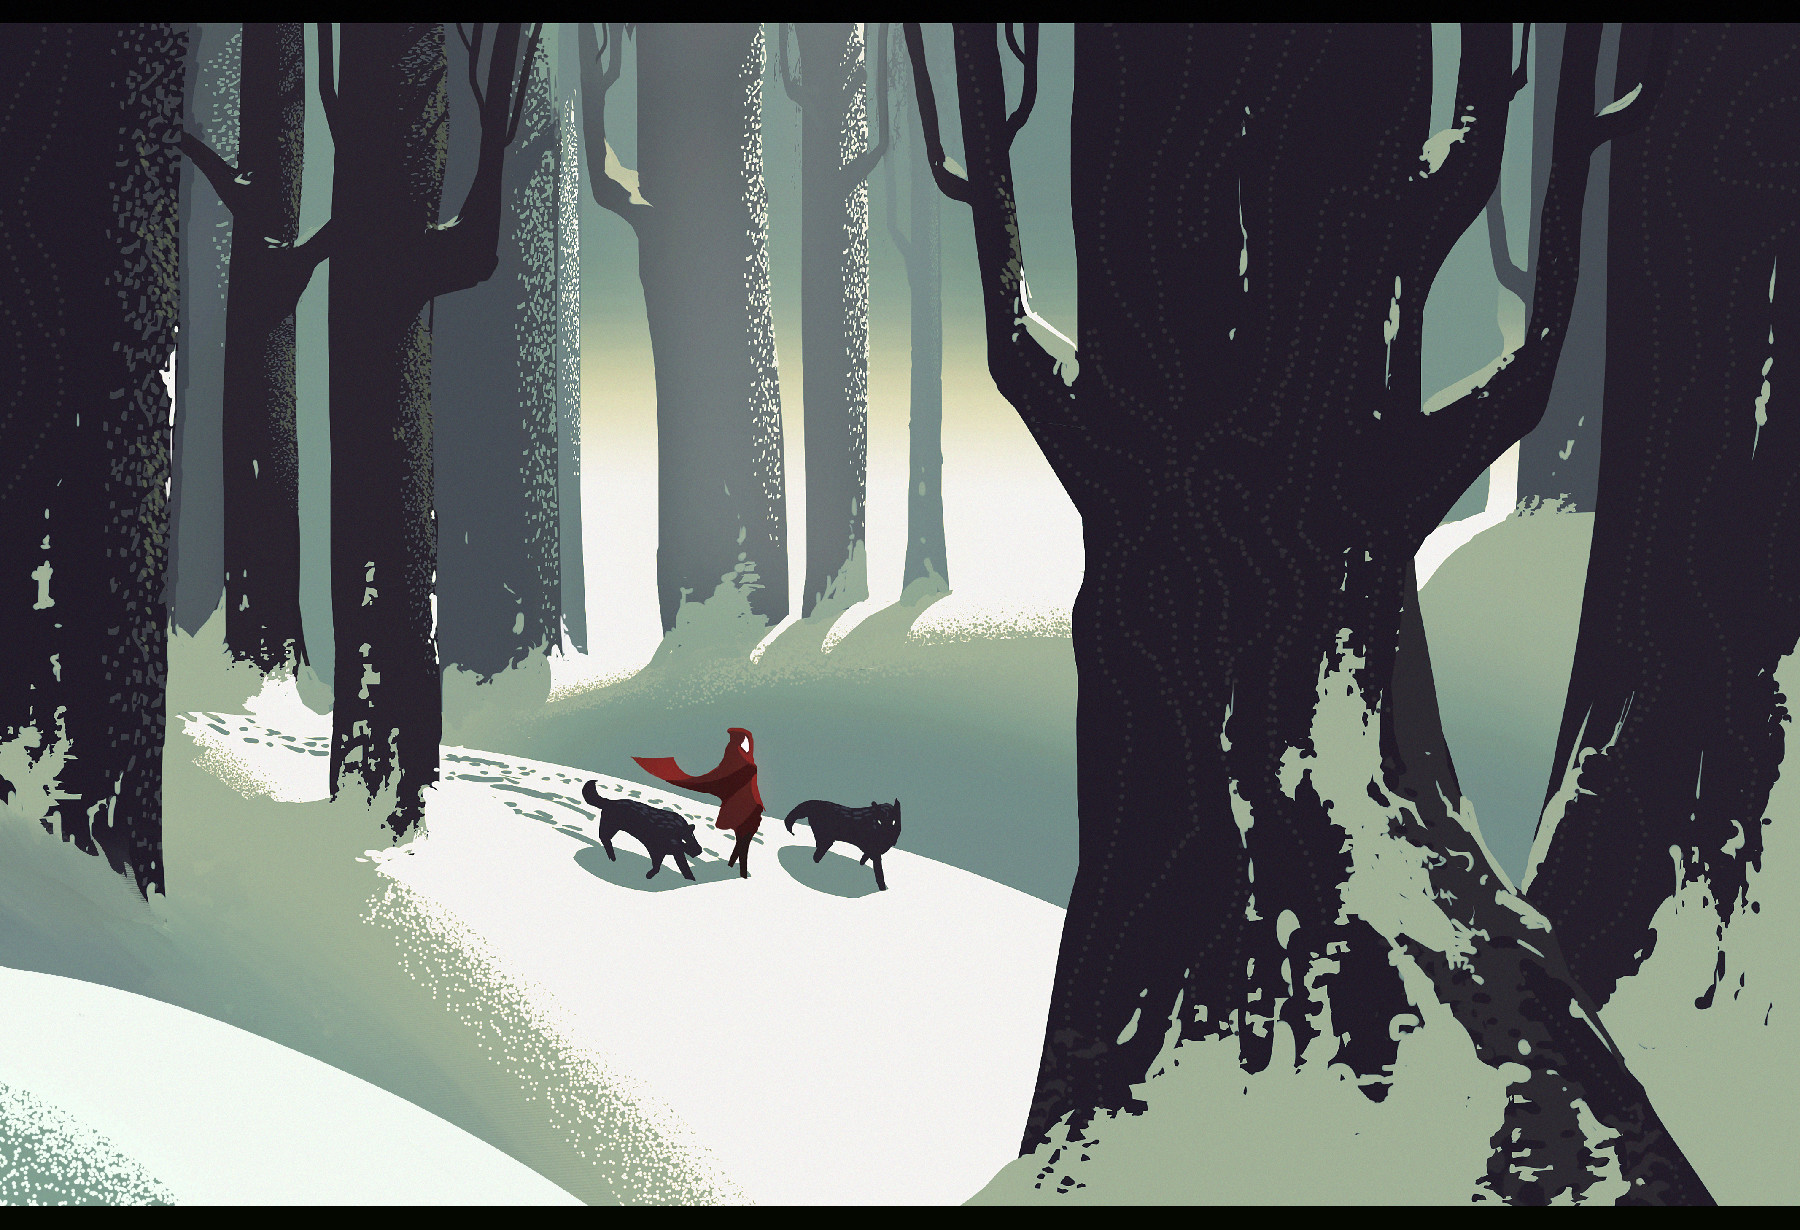 Little Red Riding Hood, Mahea Rodrigues, Winter, Snow, Trees, Wolf, Fairy tale, Forest, Illustration, Artwork, Animals, Fantasy girl Wallpaper